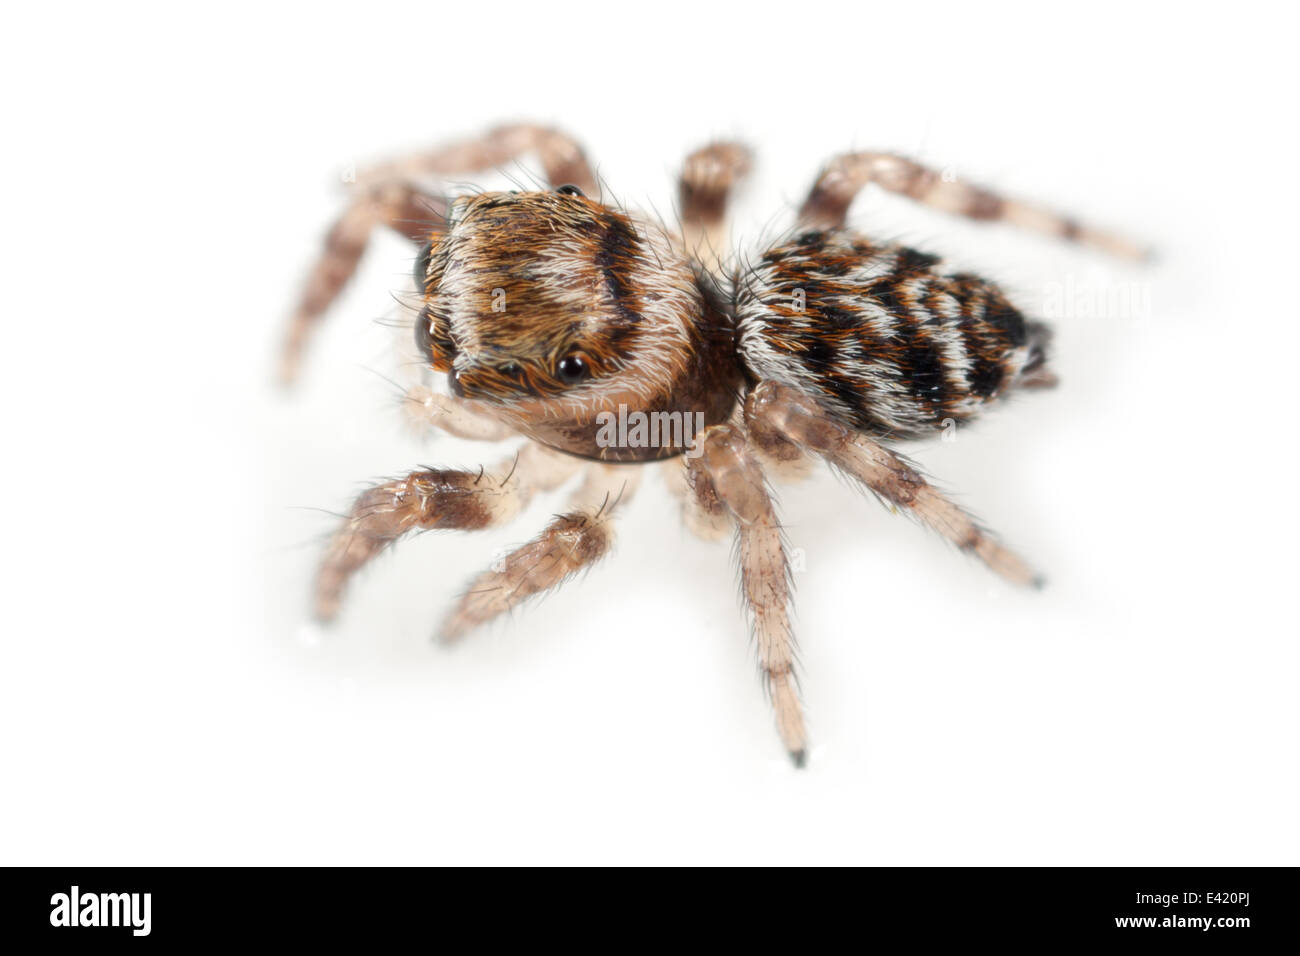 Juvenile Evarcha falcata spider, part of the family Salticidae -  Jumping spiders. Stock Photo